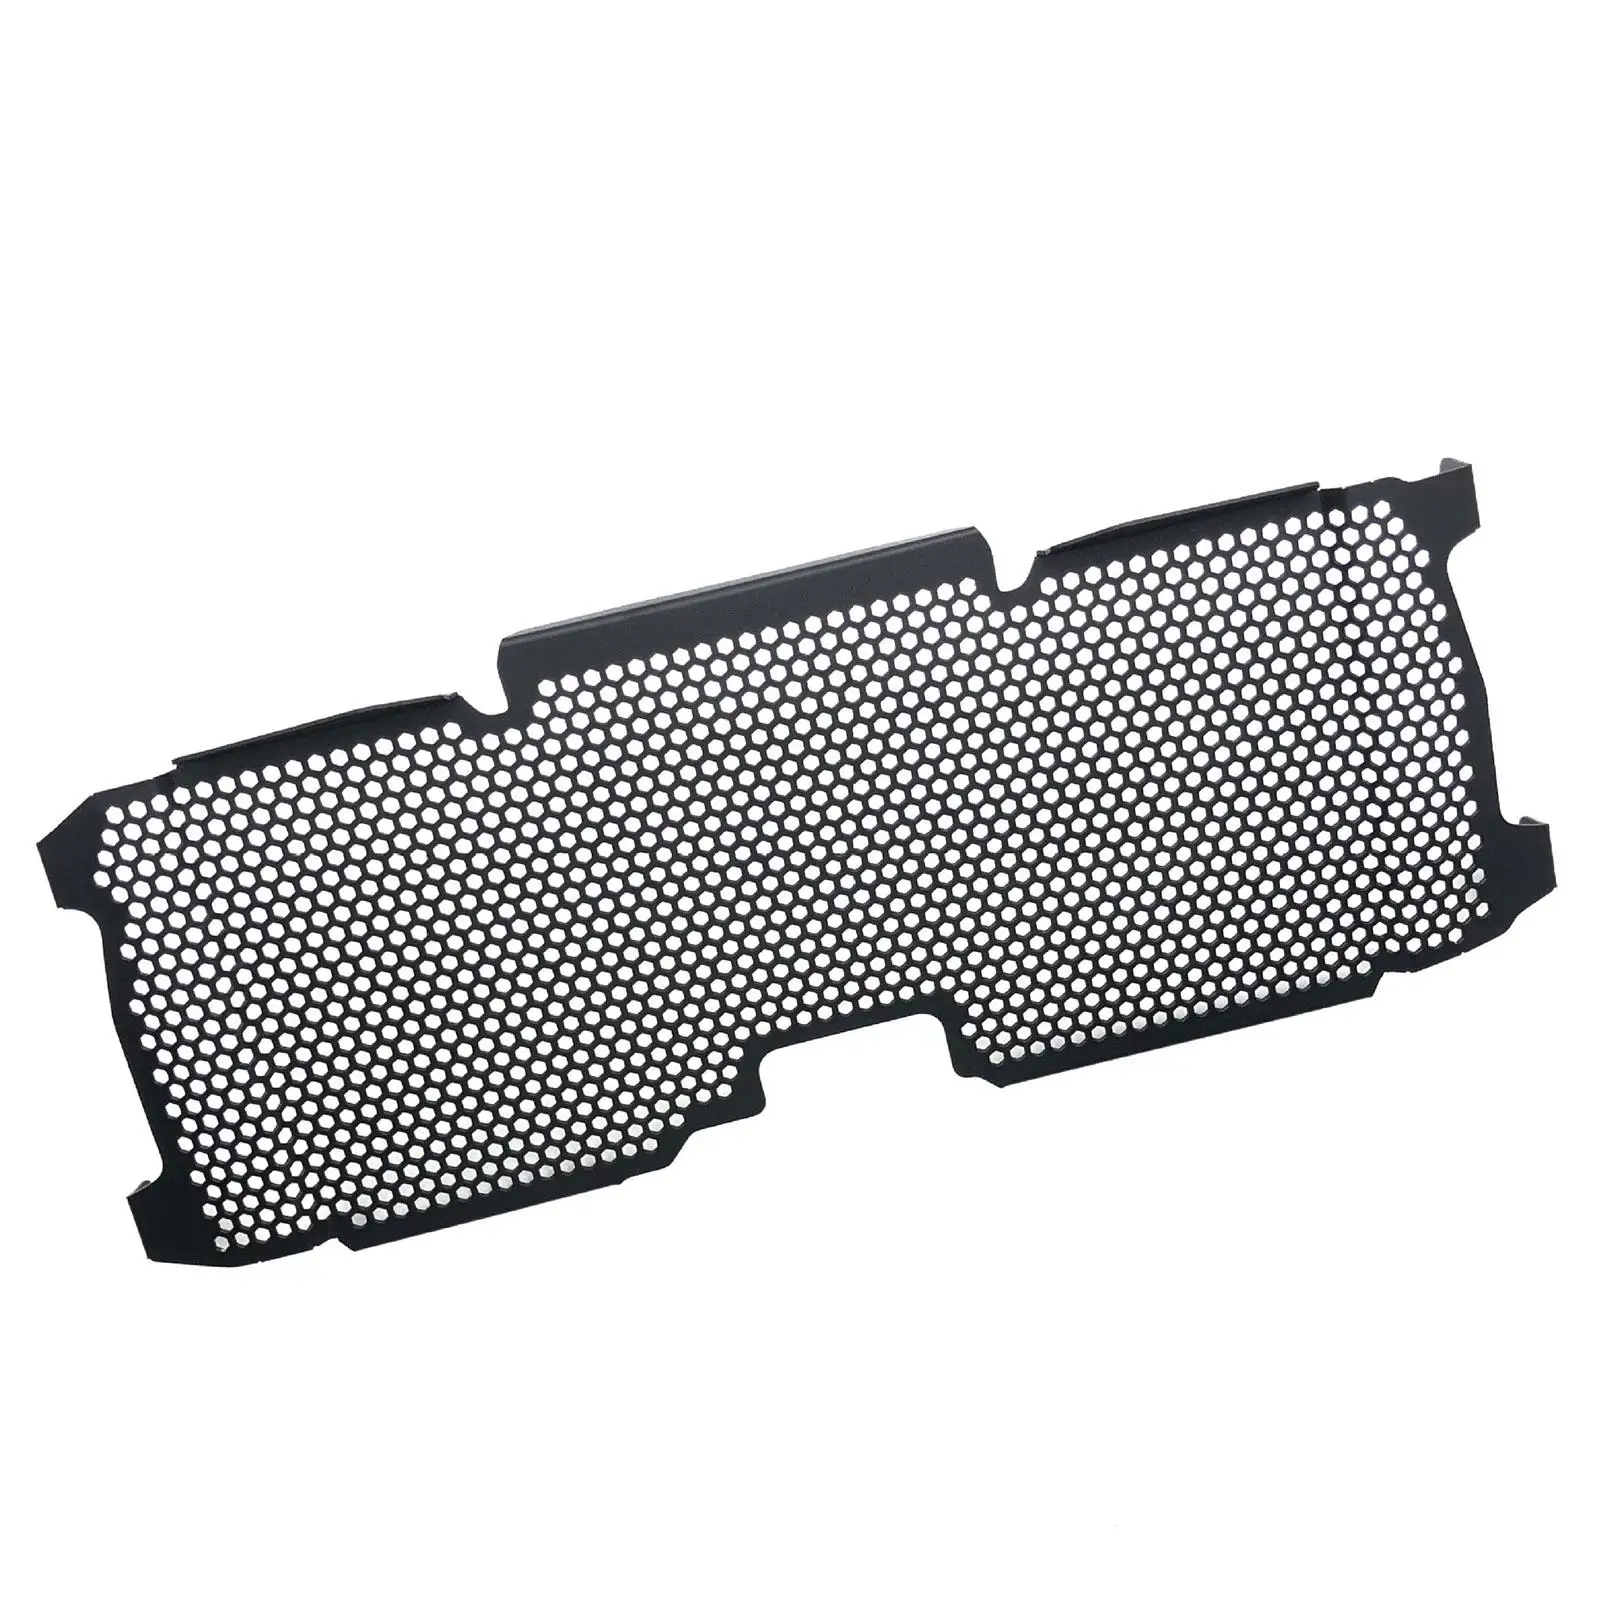 Radiator Grille Guard Protector Grill Cover, Accessory Decoration Replaces,